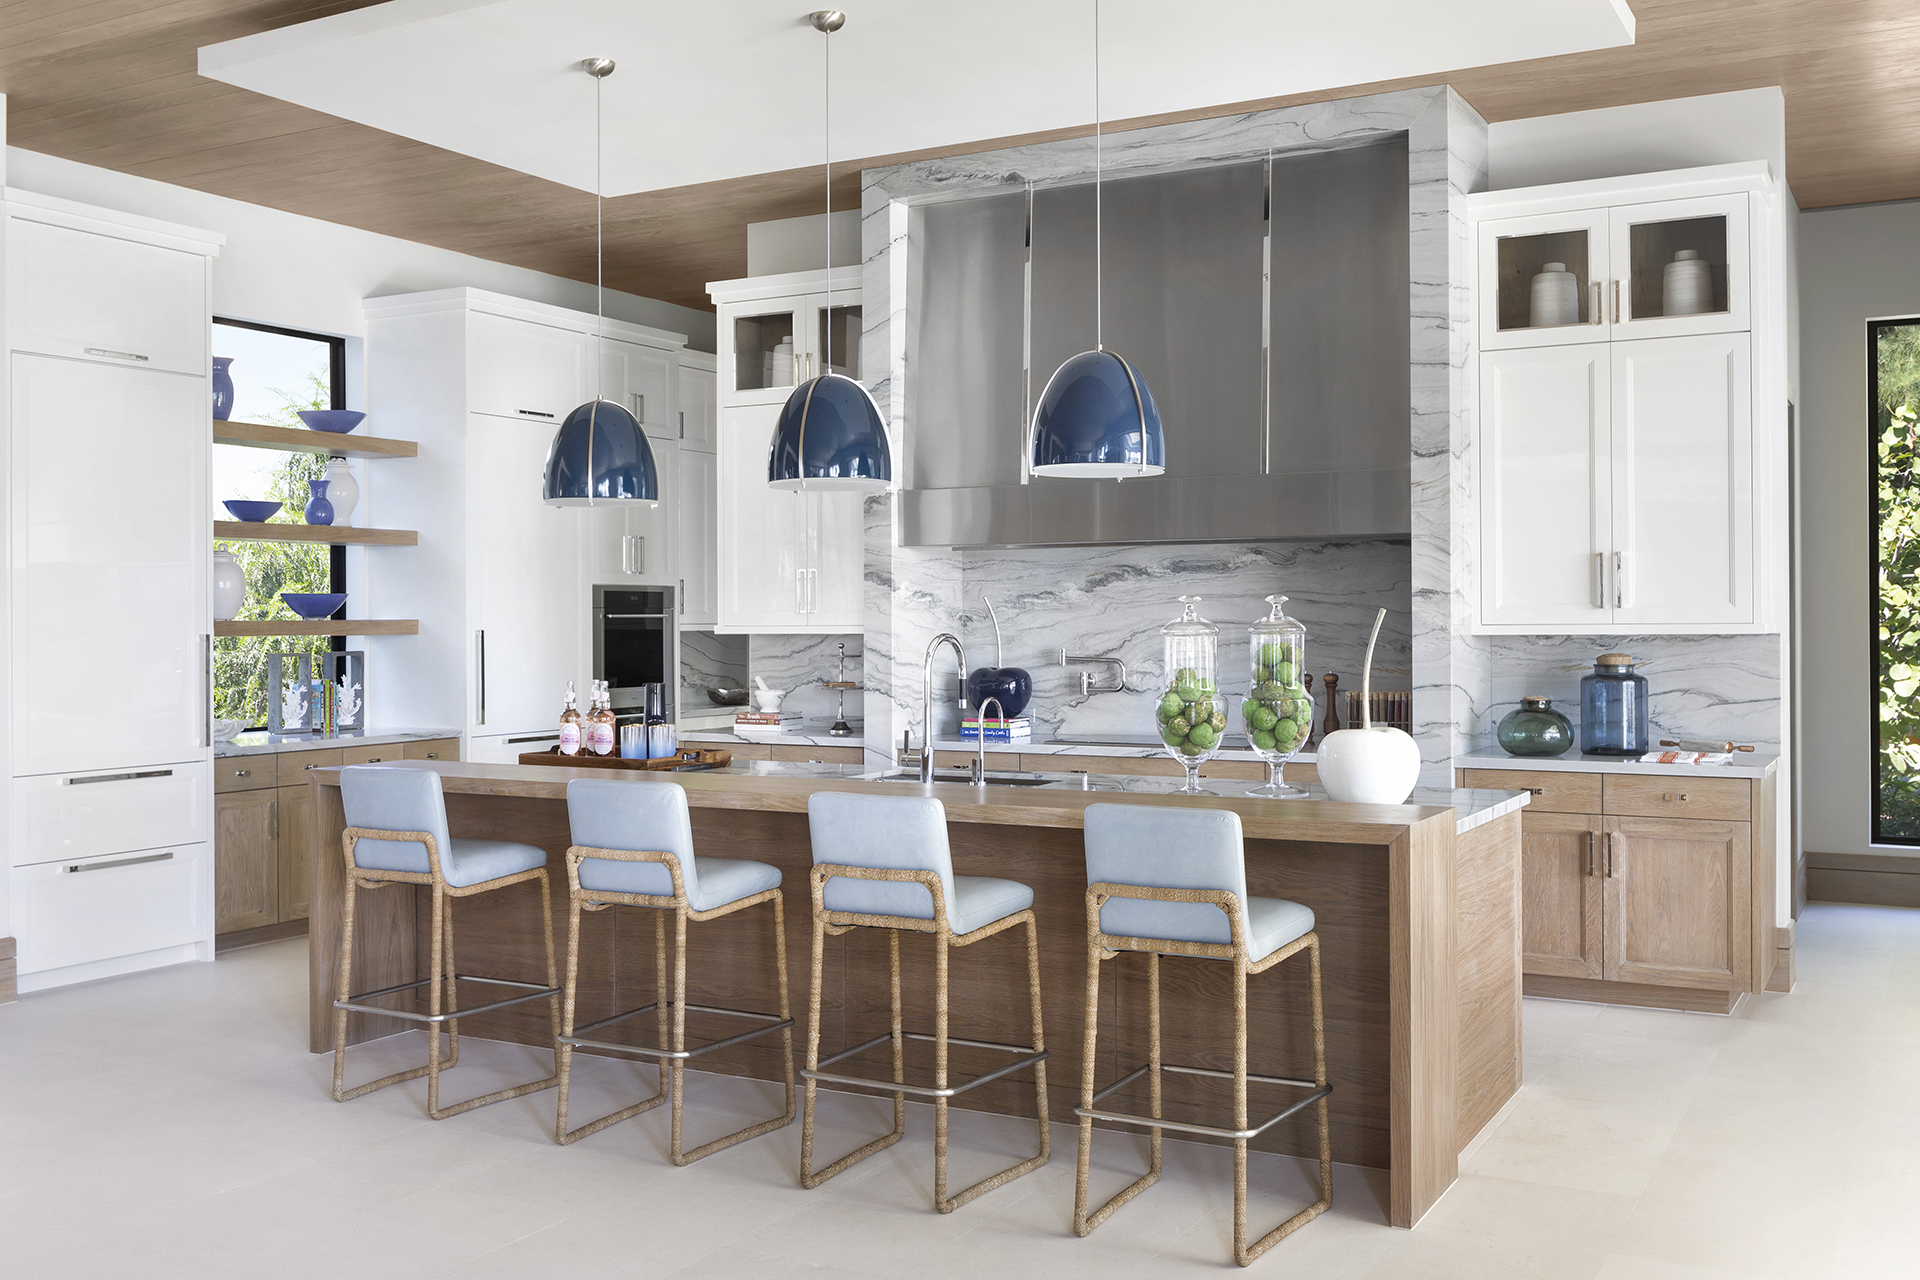 Palm Beach Kitchen from Our Team of Luxury Interior Designers